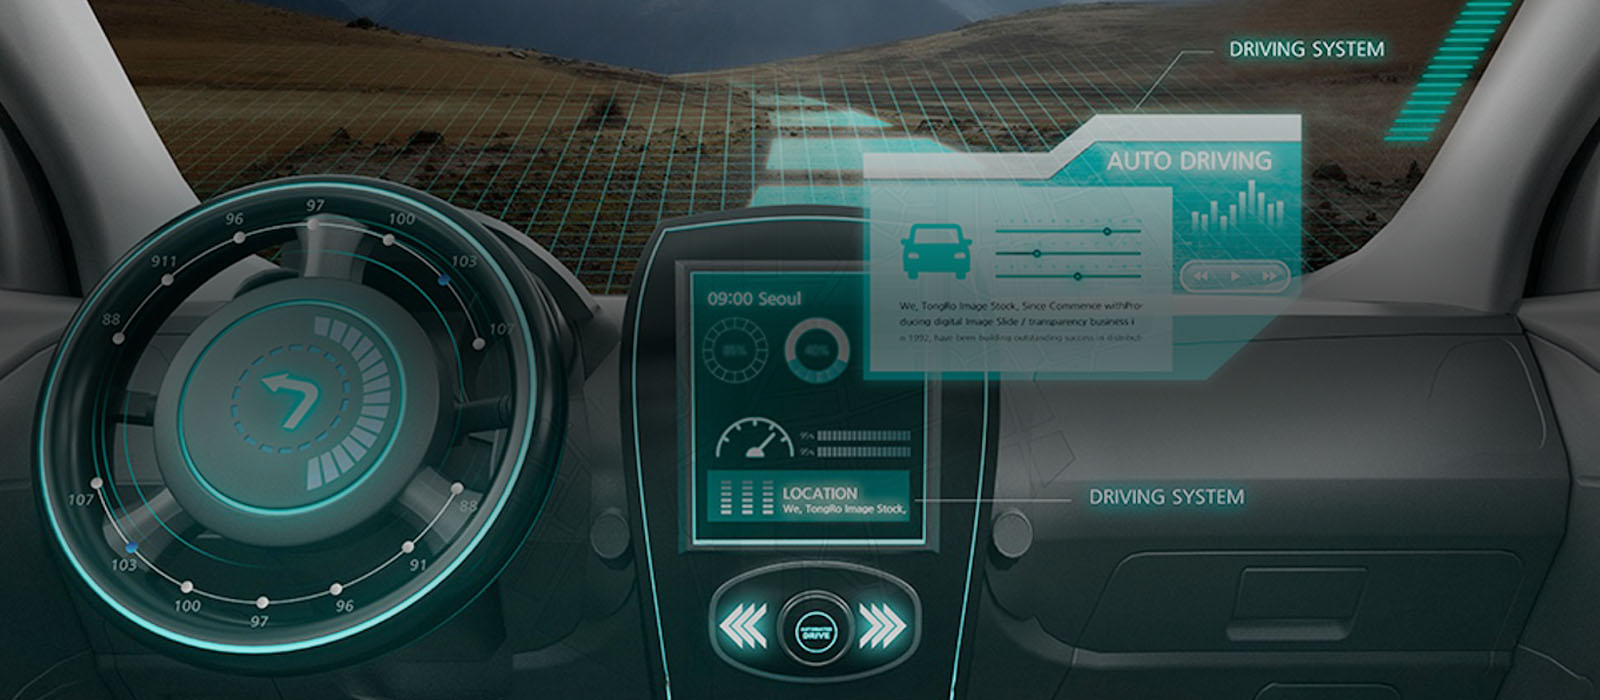 Part 11. Heart of future Mobility delivered by LG Electronics, Telematics1